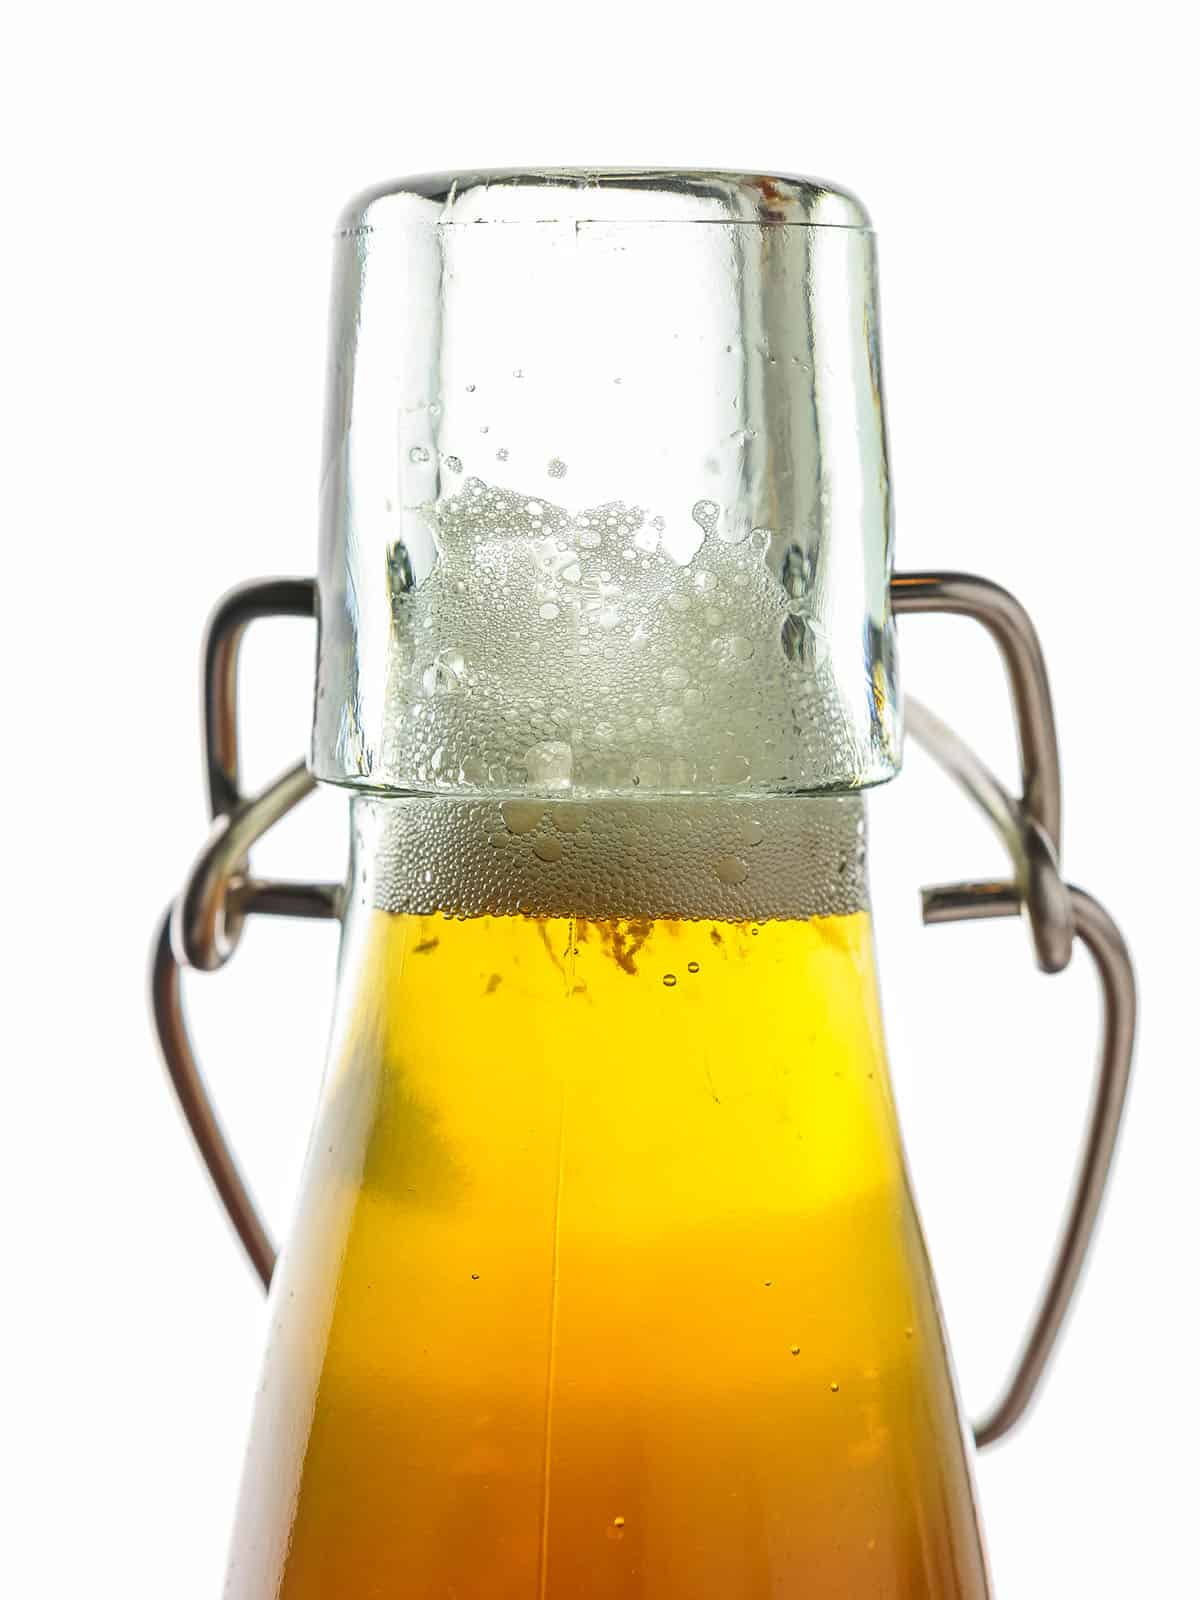 A close up of a neck of a bottle of ginger kombucha, with bubbles foaming on the top.